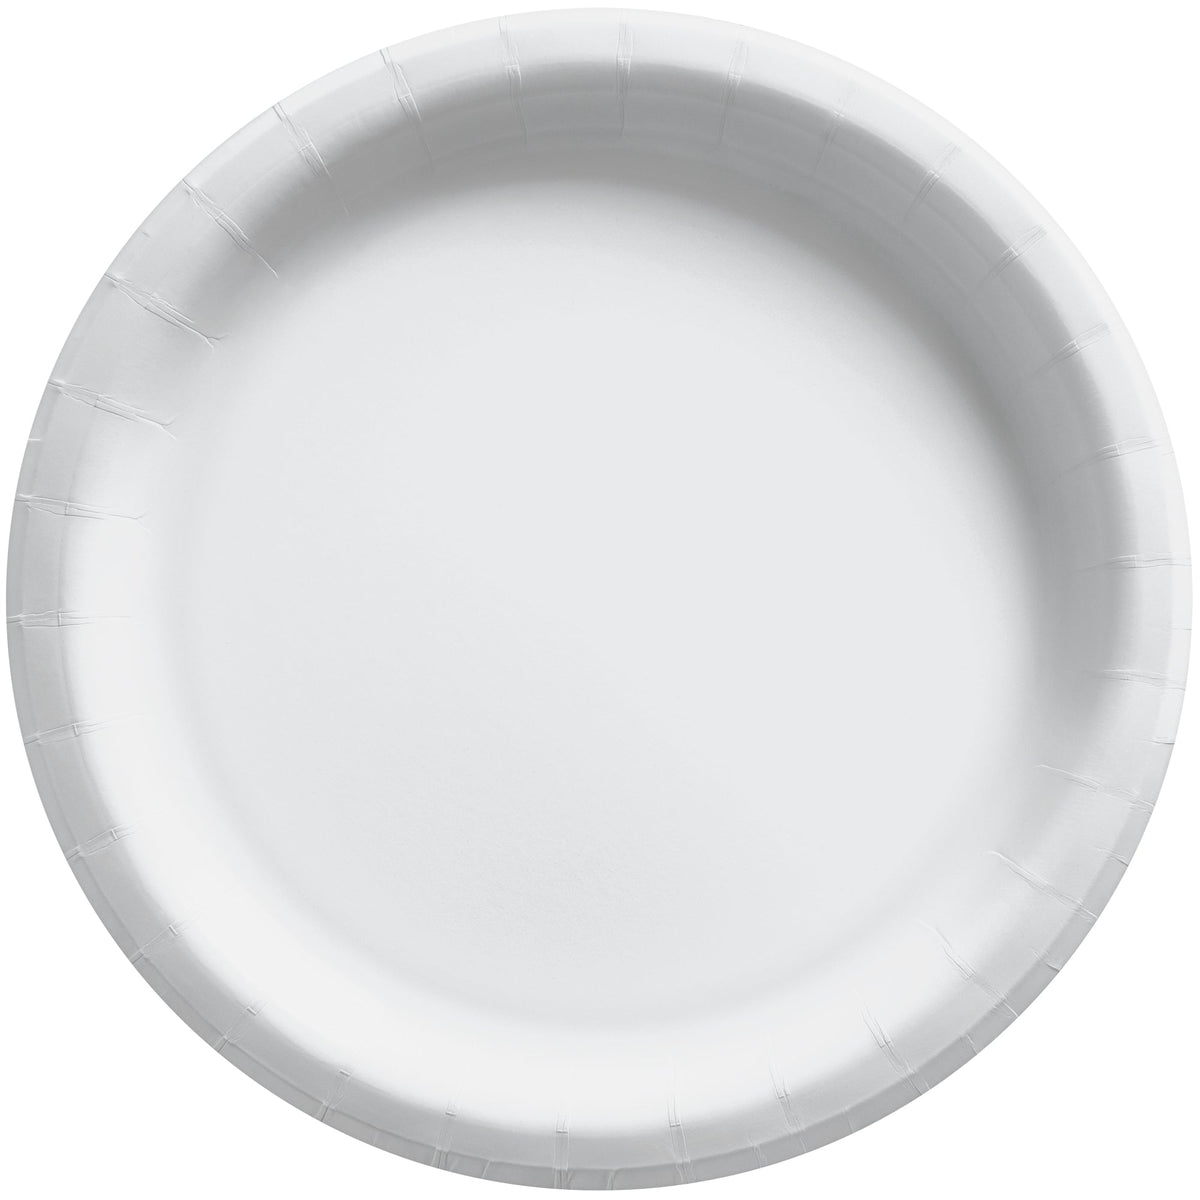 Frosty White 6 3/4" Round Paper Plates, 50 count